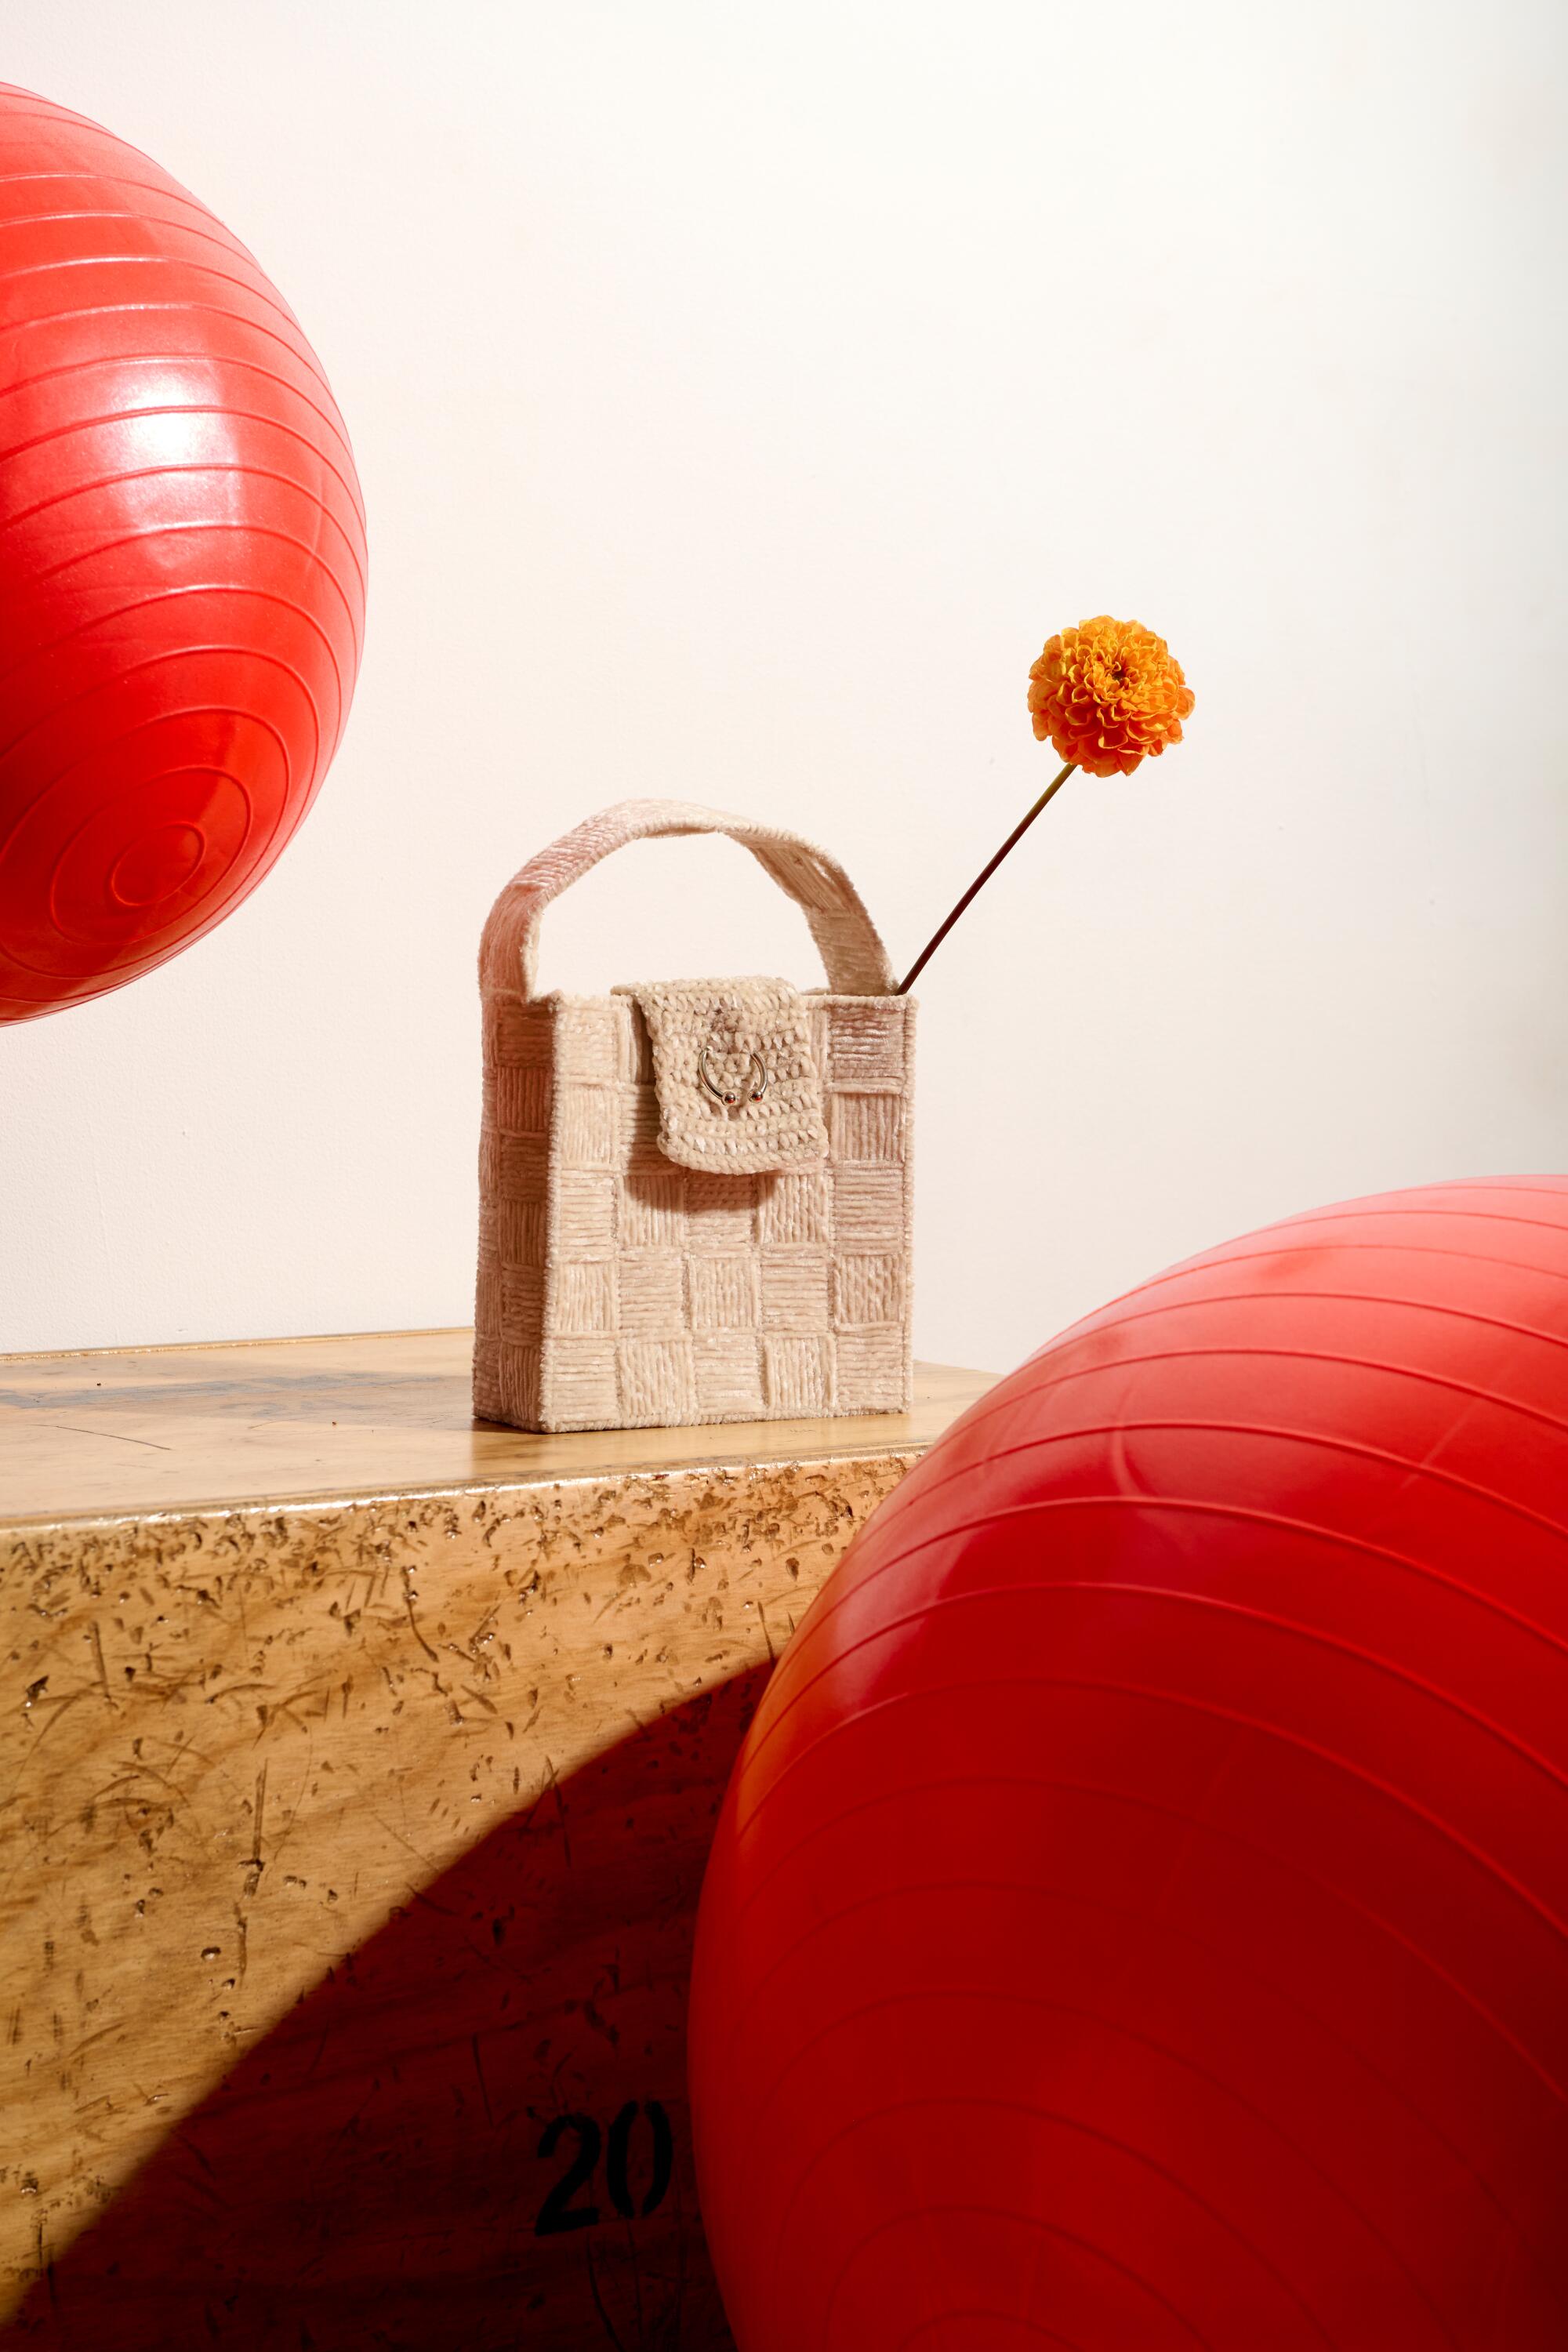 A square bag with a high-stemmed flower placed on a table near two large red balls.